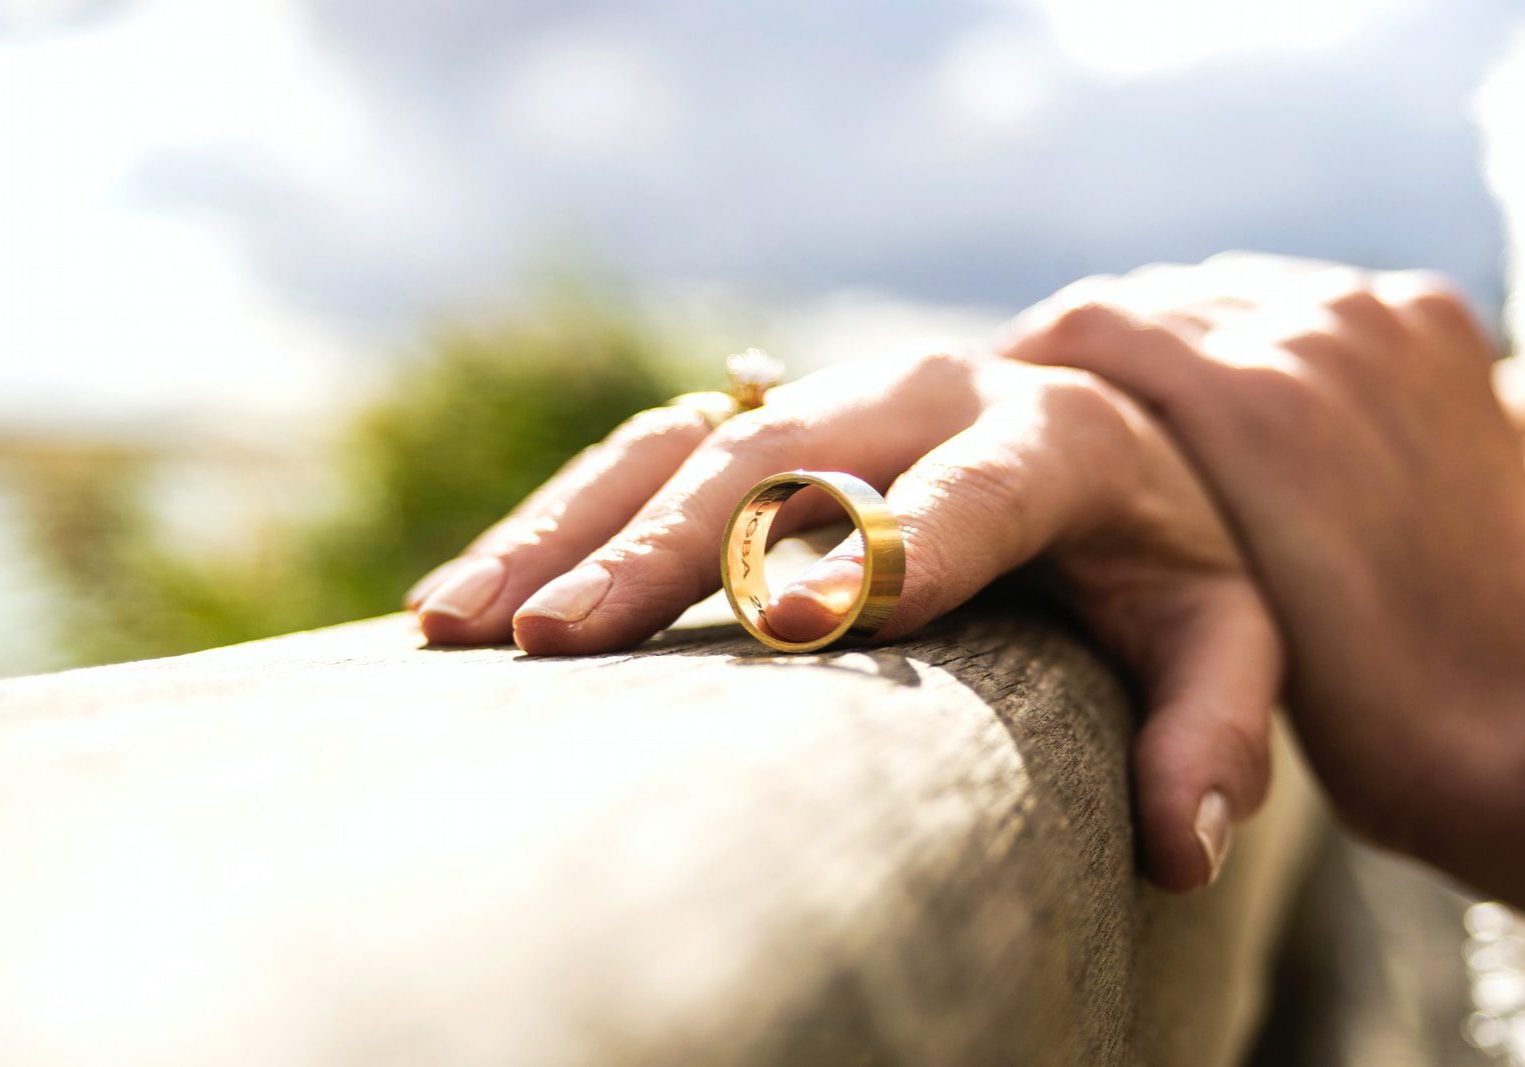 person holding gold wedding band